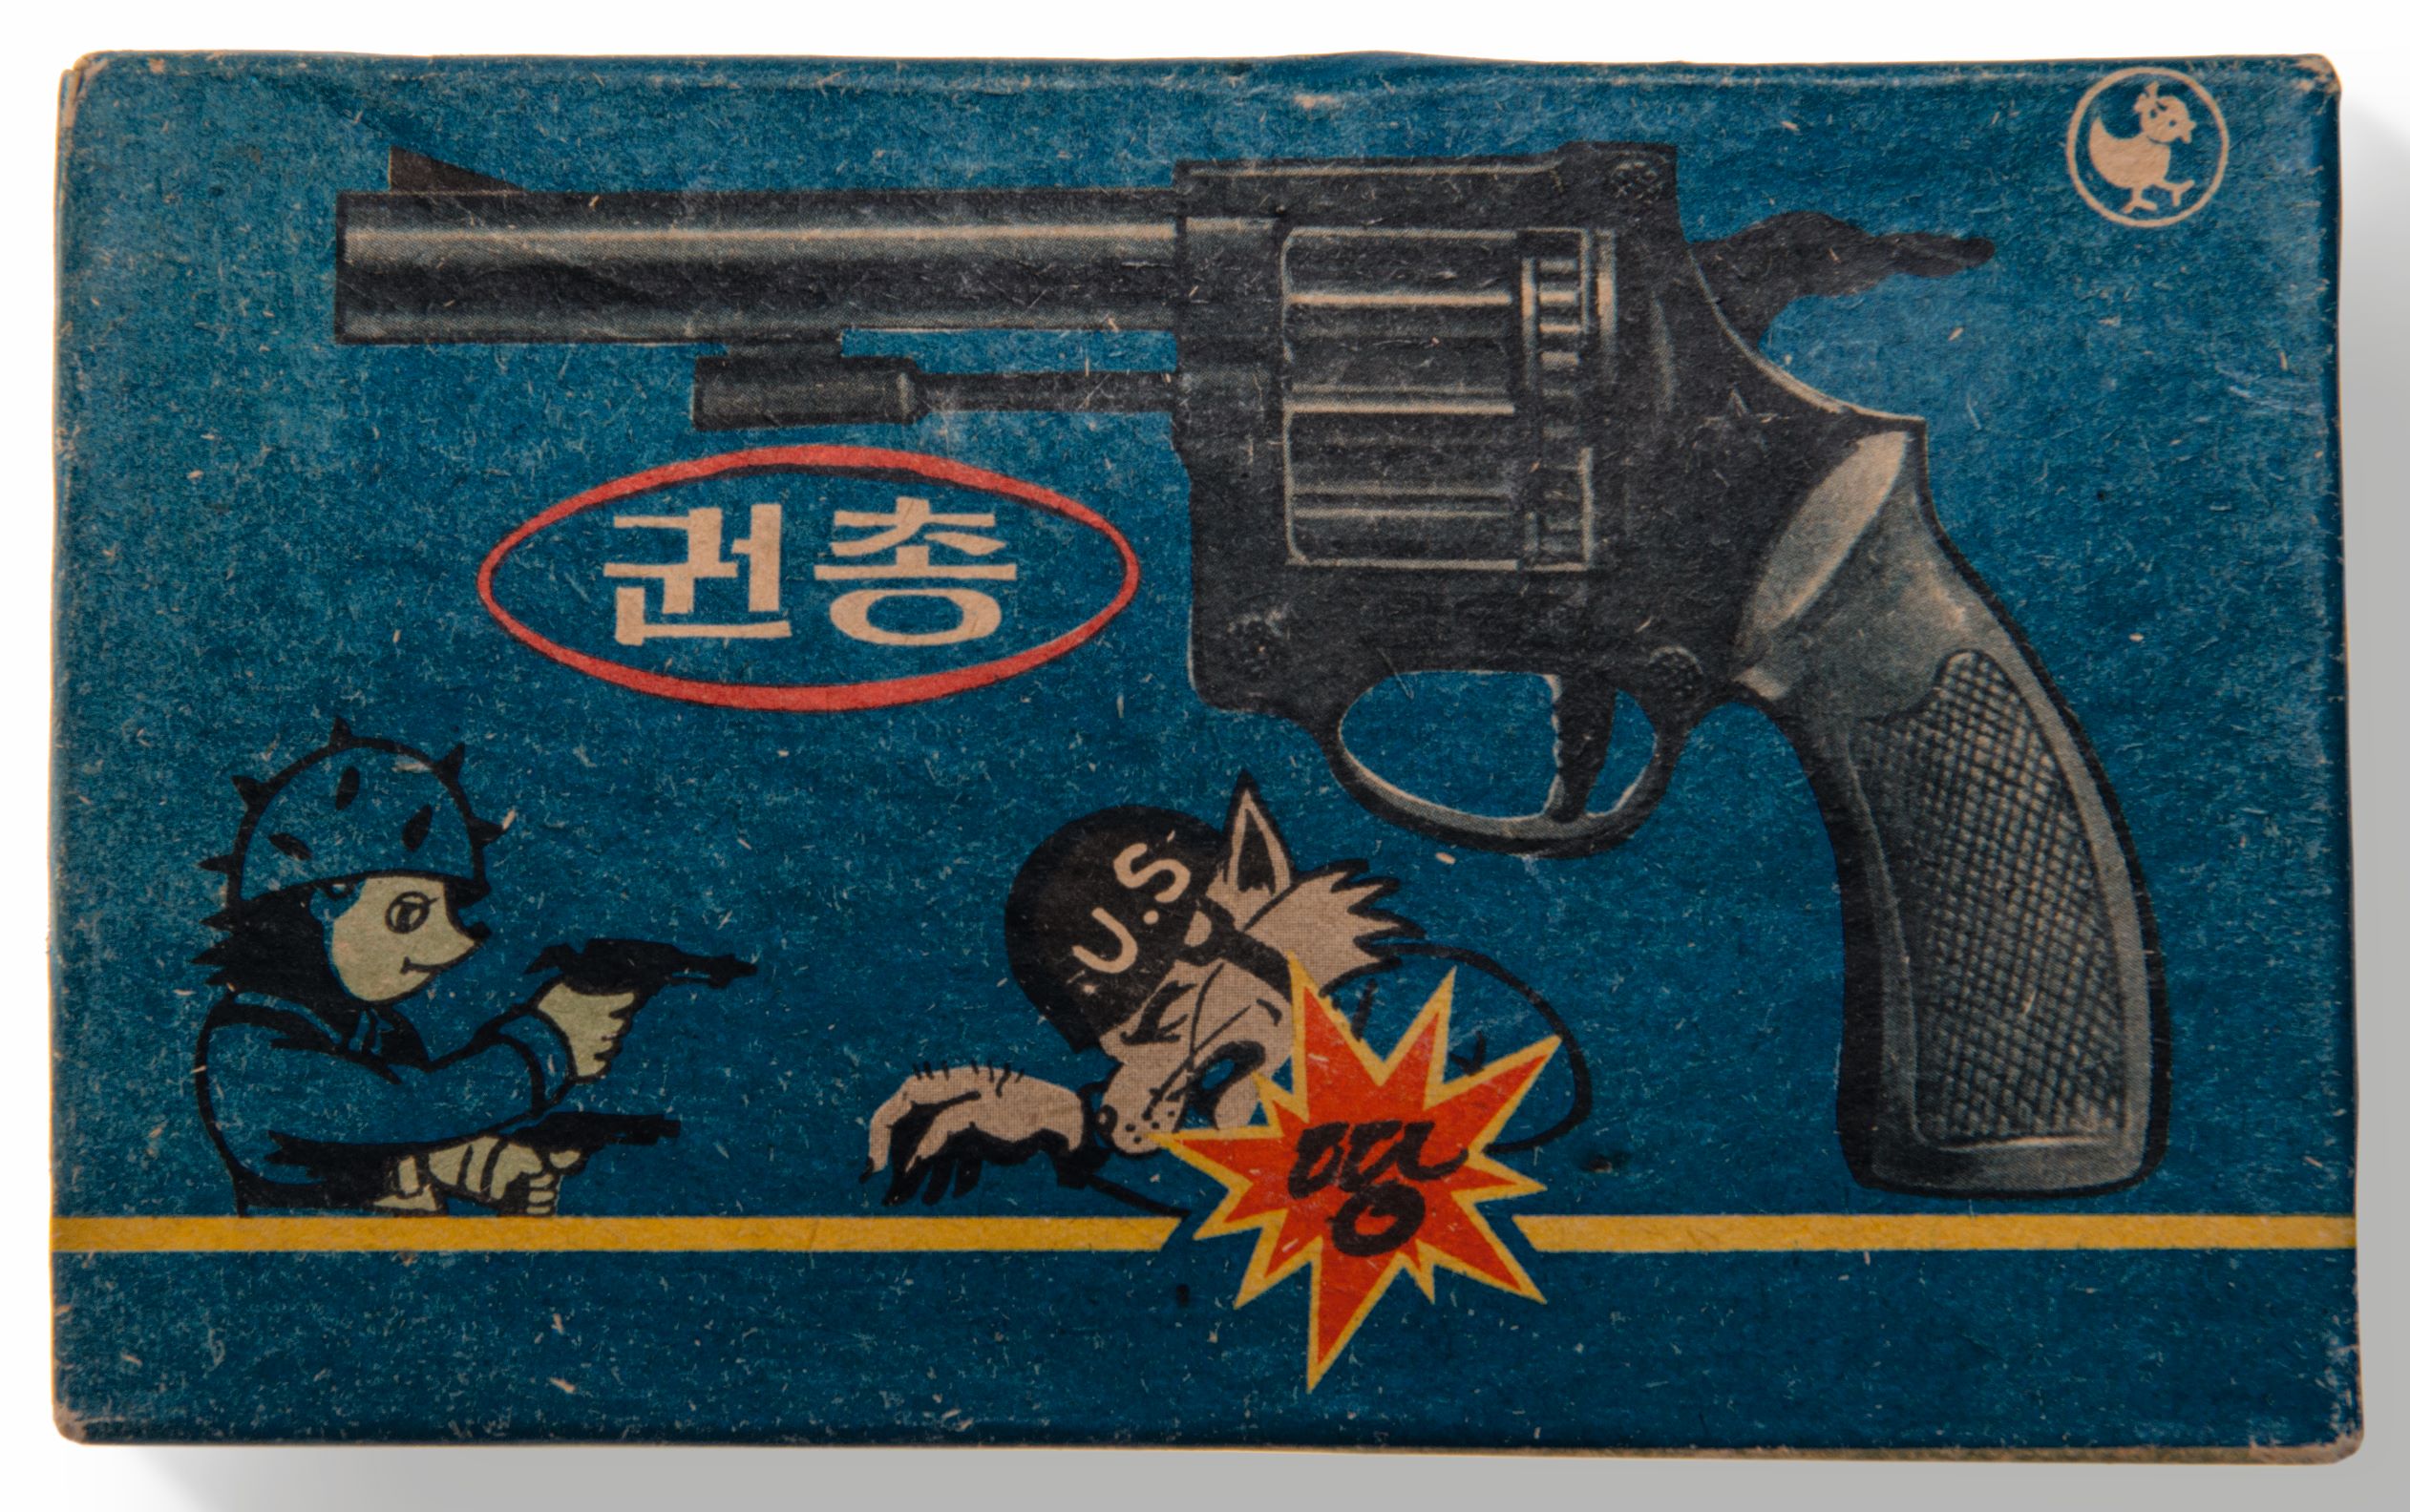 Toy gun box, as reproduced in Made in North Korea: Graphics From Everyday Life in the DPRK